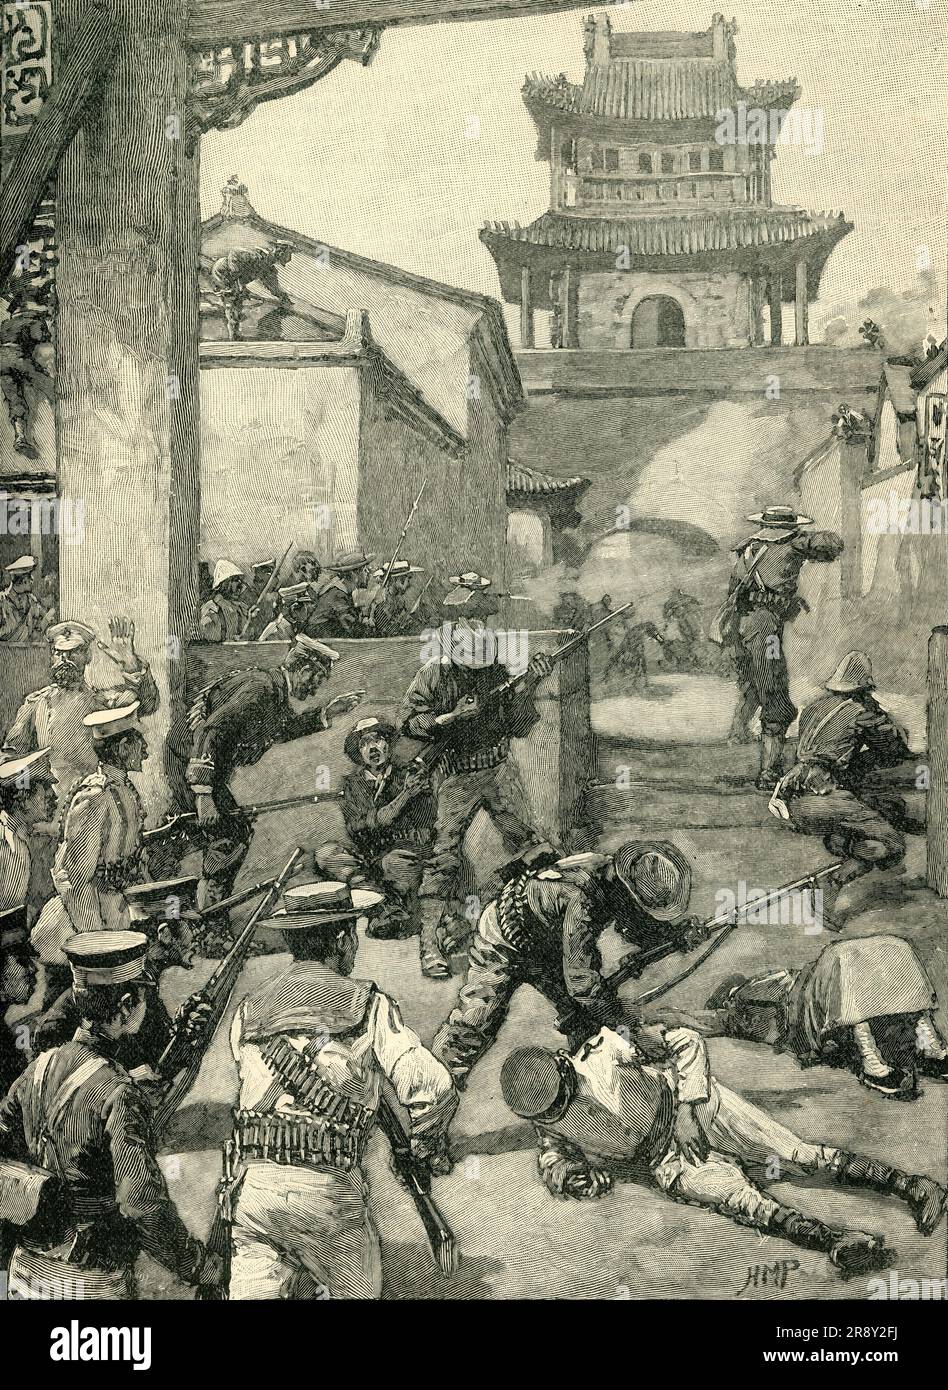 'The War In China: The Fighting at Tientsin', July 1900, (c1900). The Battle of Tientsin during the Boxer Rebellion in Northern China. A multinational military force, representing the Eight-Nation Alliance, rescued a besieged population of foreign nationals in the city of Tientsin (Tianjin) by defeating the Chinese Imperial army and the Boxers. From &quot;Cassell's History of England, Vol. IX&quot;. [Cassell and Company, Limited, London, Paris, New York &amp; Melbourne] Stock Photo